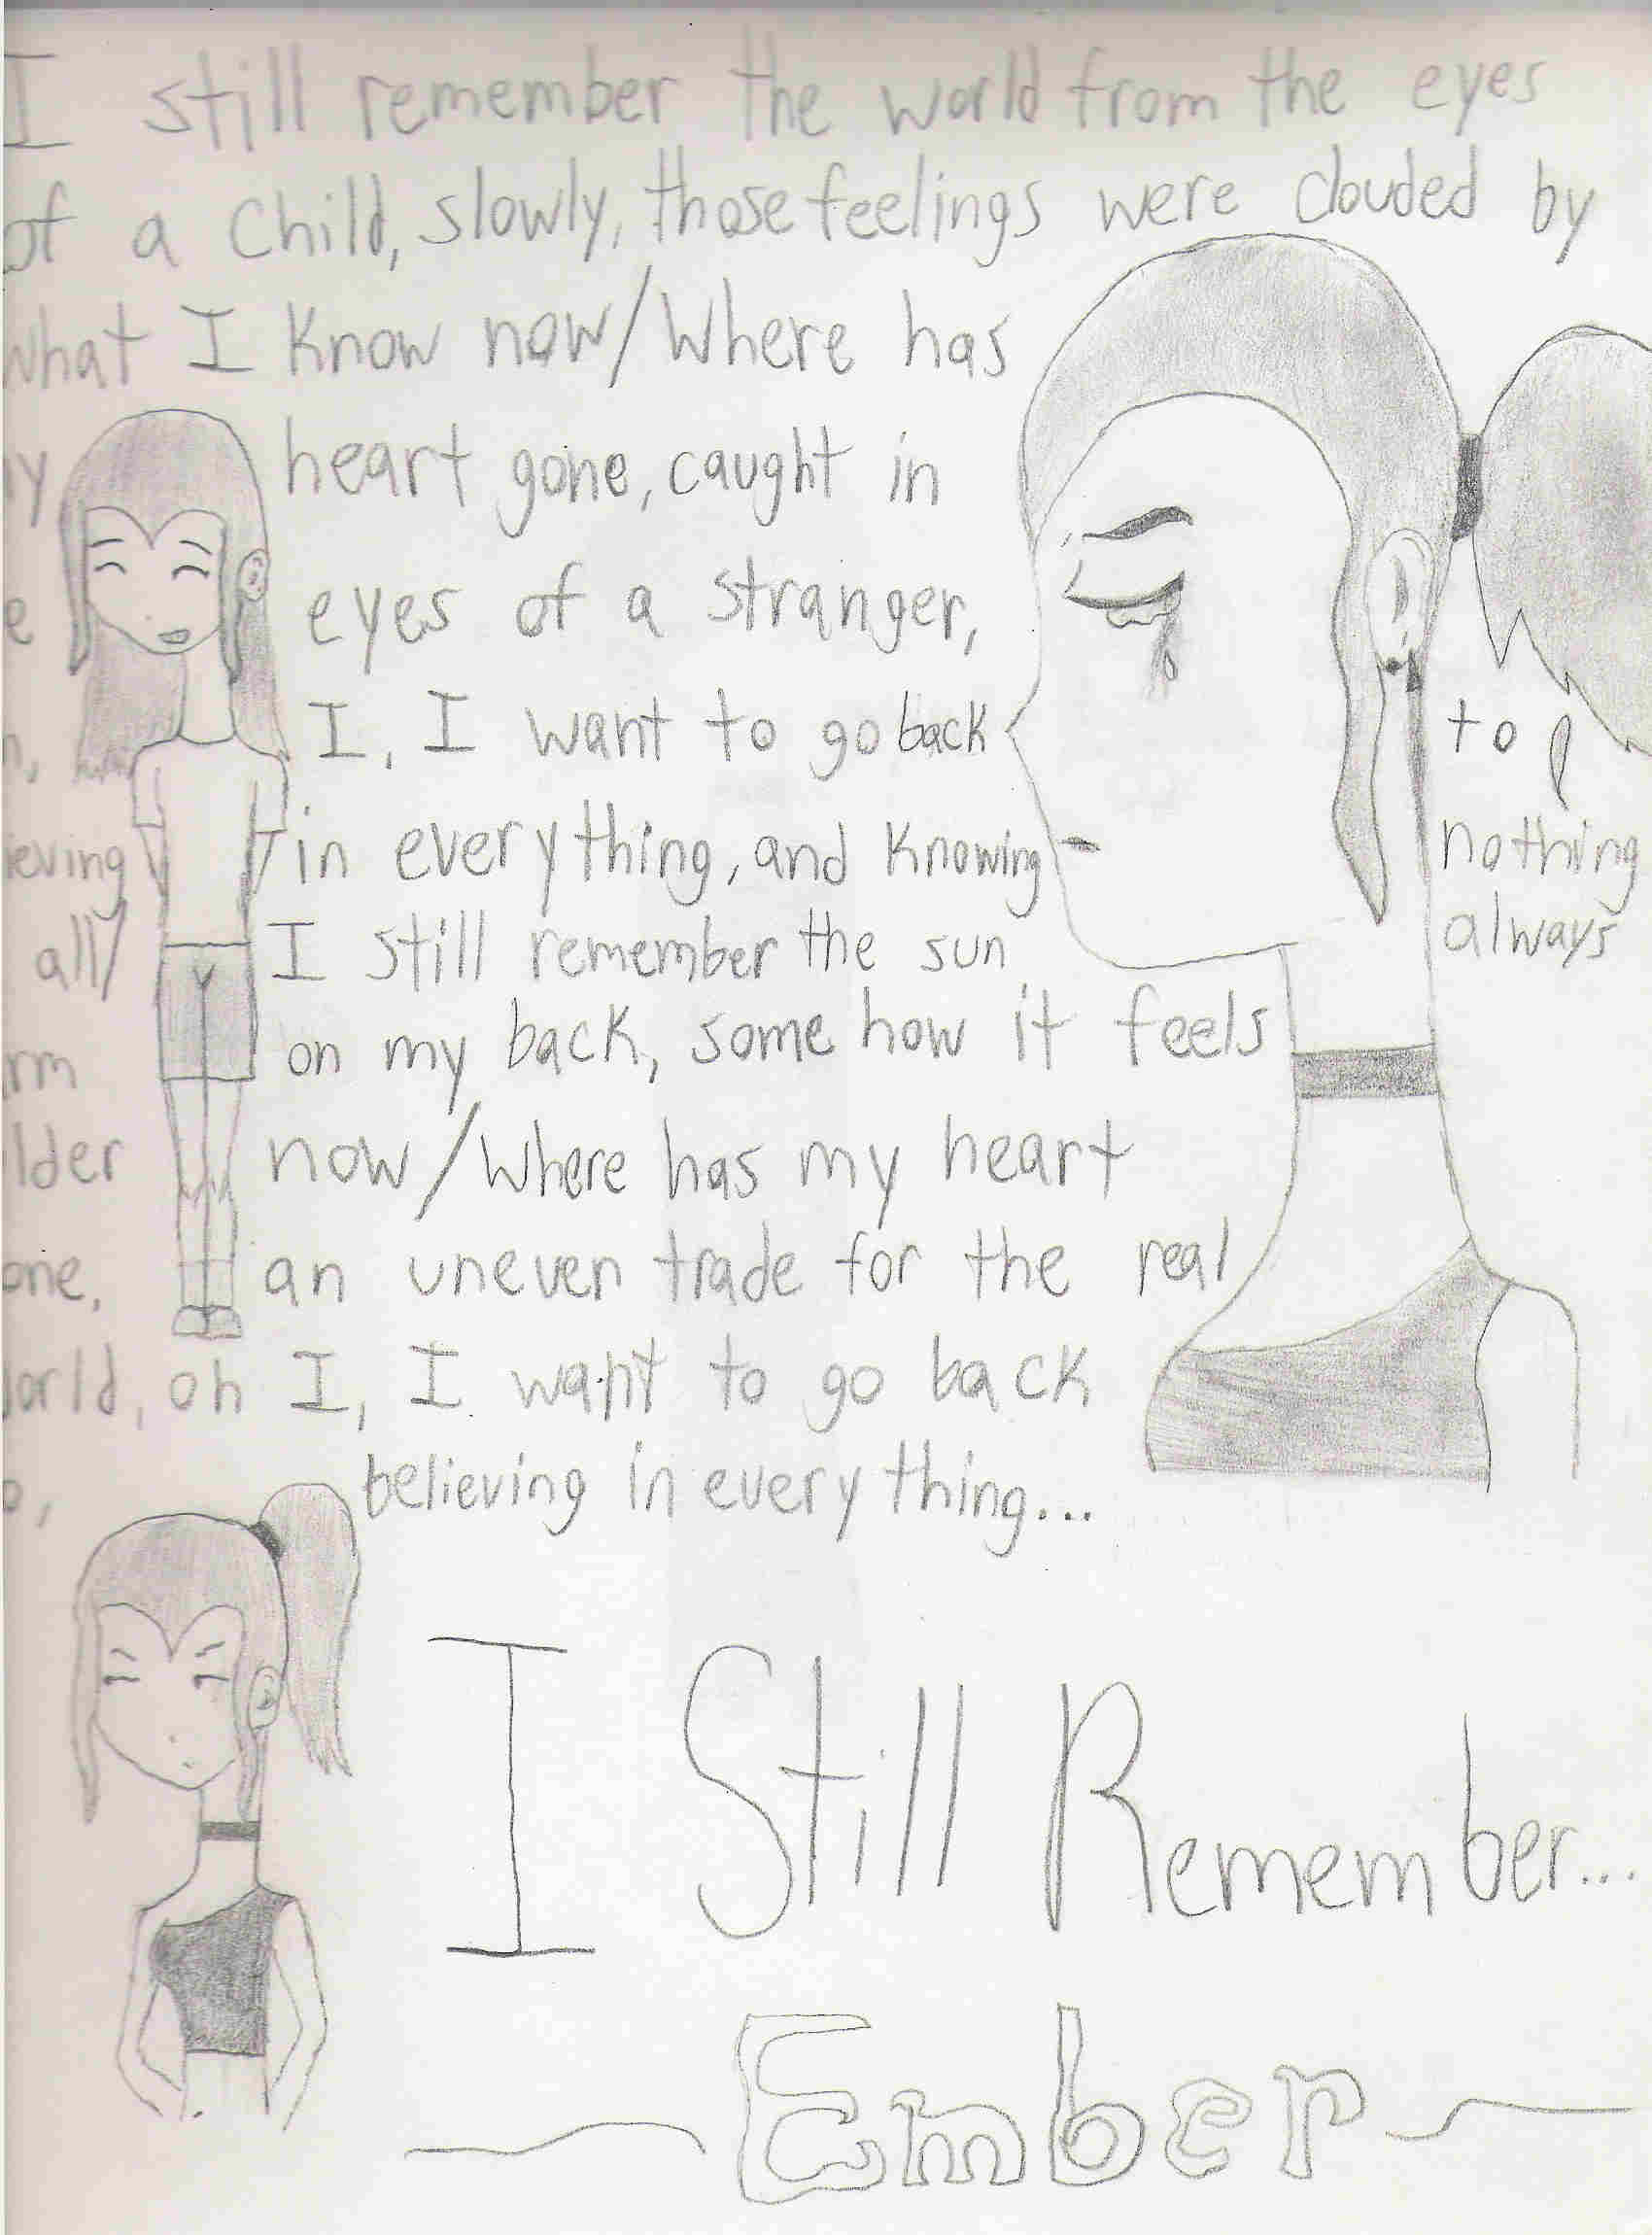 "I still remember" Emberlover's request by Hieis_lover_and_obsessor